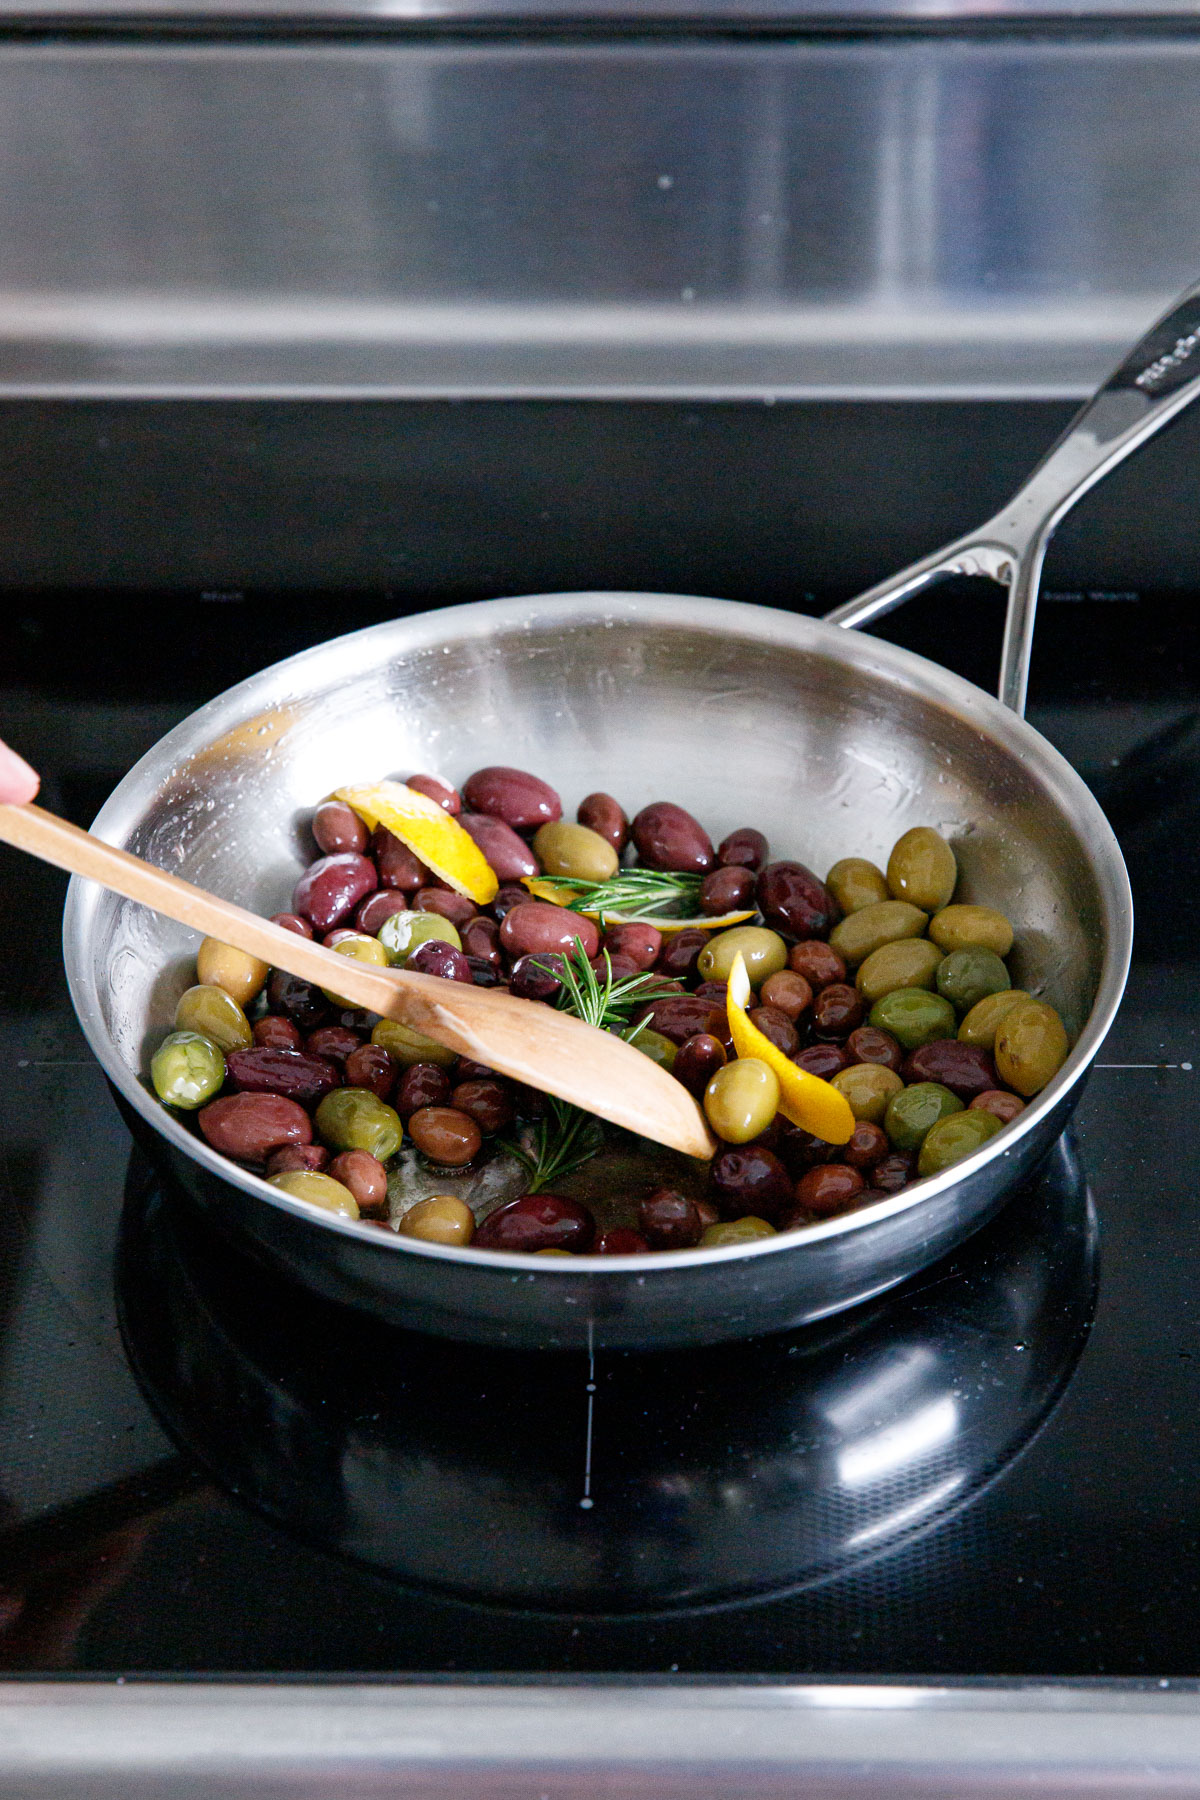 Wooden spoon stirring multi-colored olives in a skillet with strips of lemon peel and rosemary.